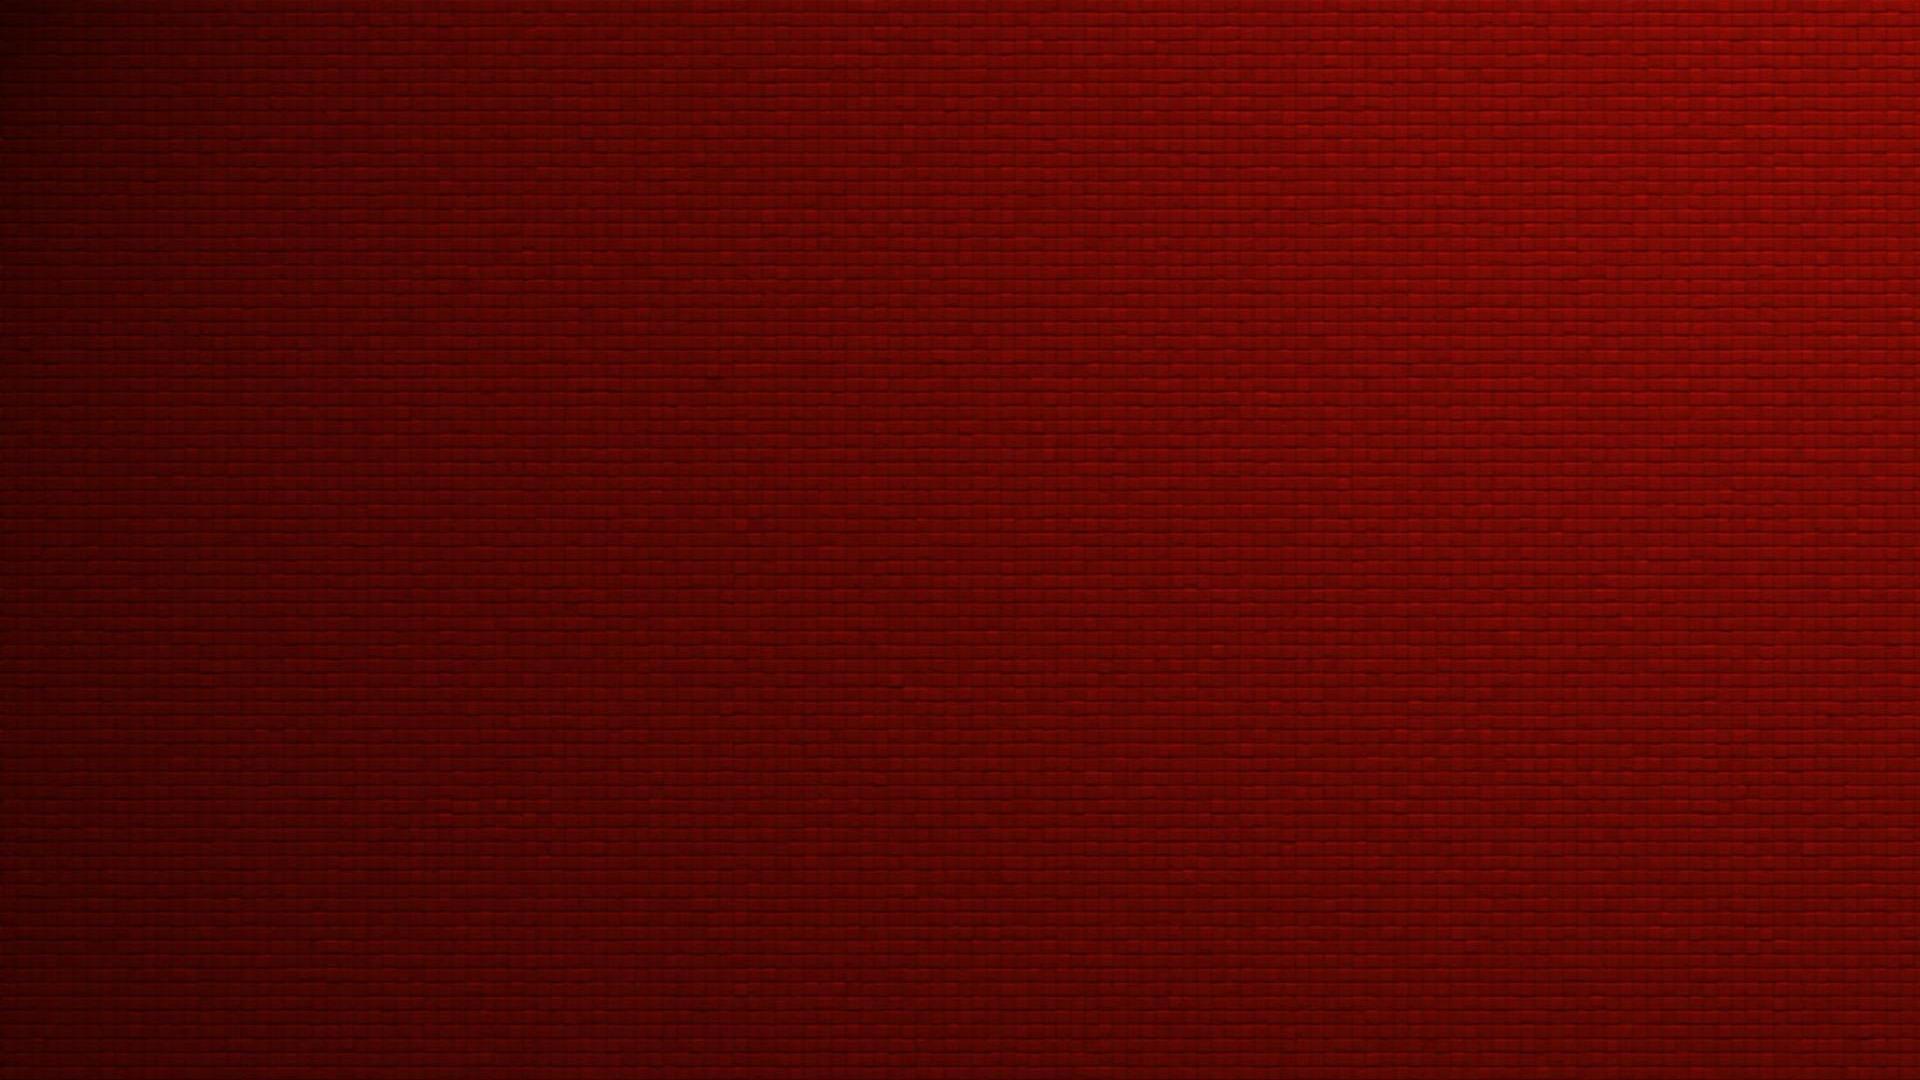 40 Crisp Red Wallpapers For Desktop Laptop and Tablet Devices 1920x1080